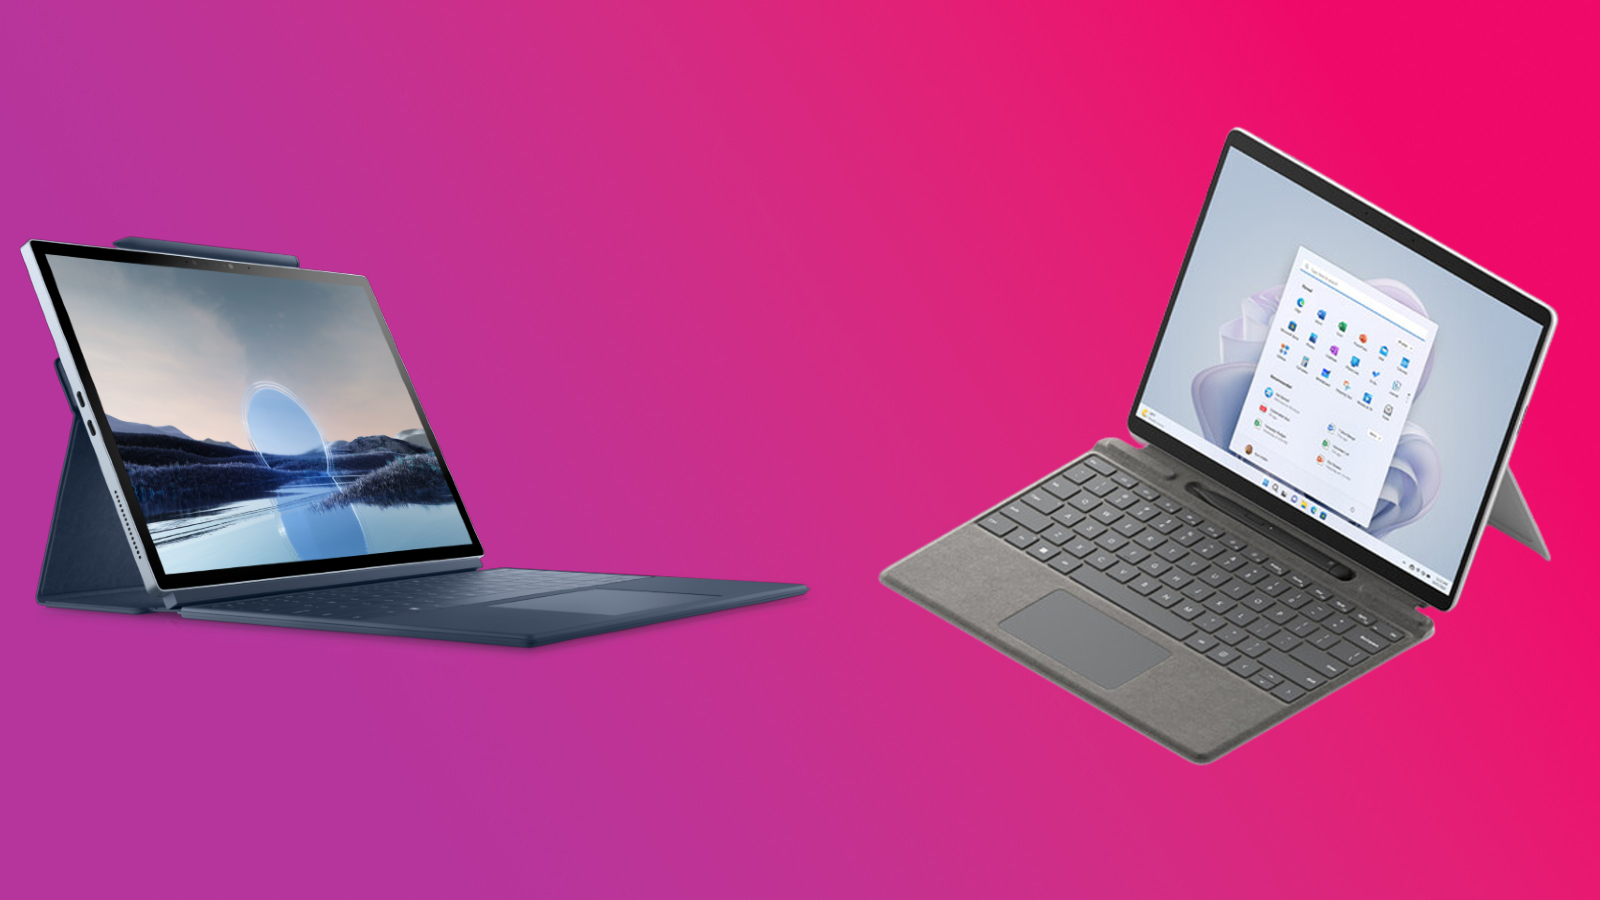 Microsoft Surface Pro 9 sale: Our favorite 2-in-1 laptop is $300